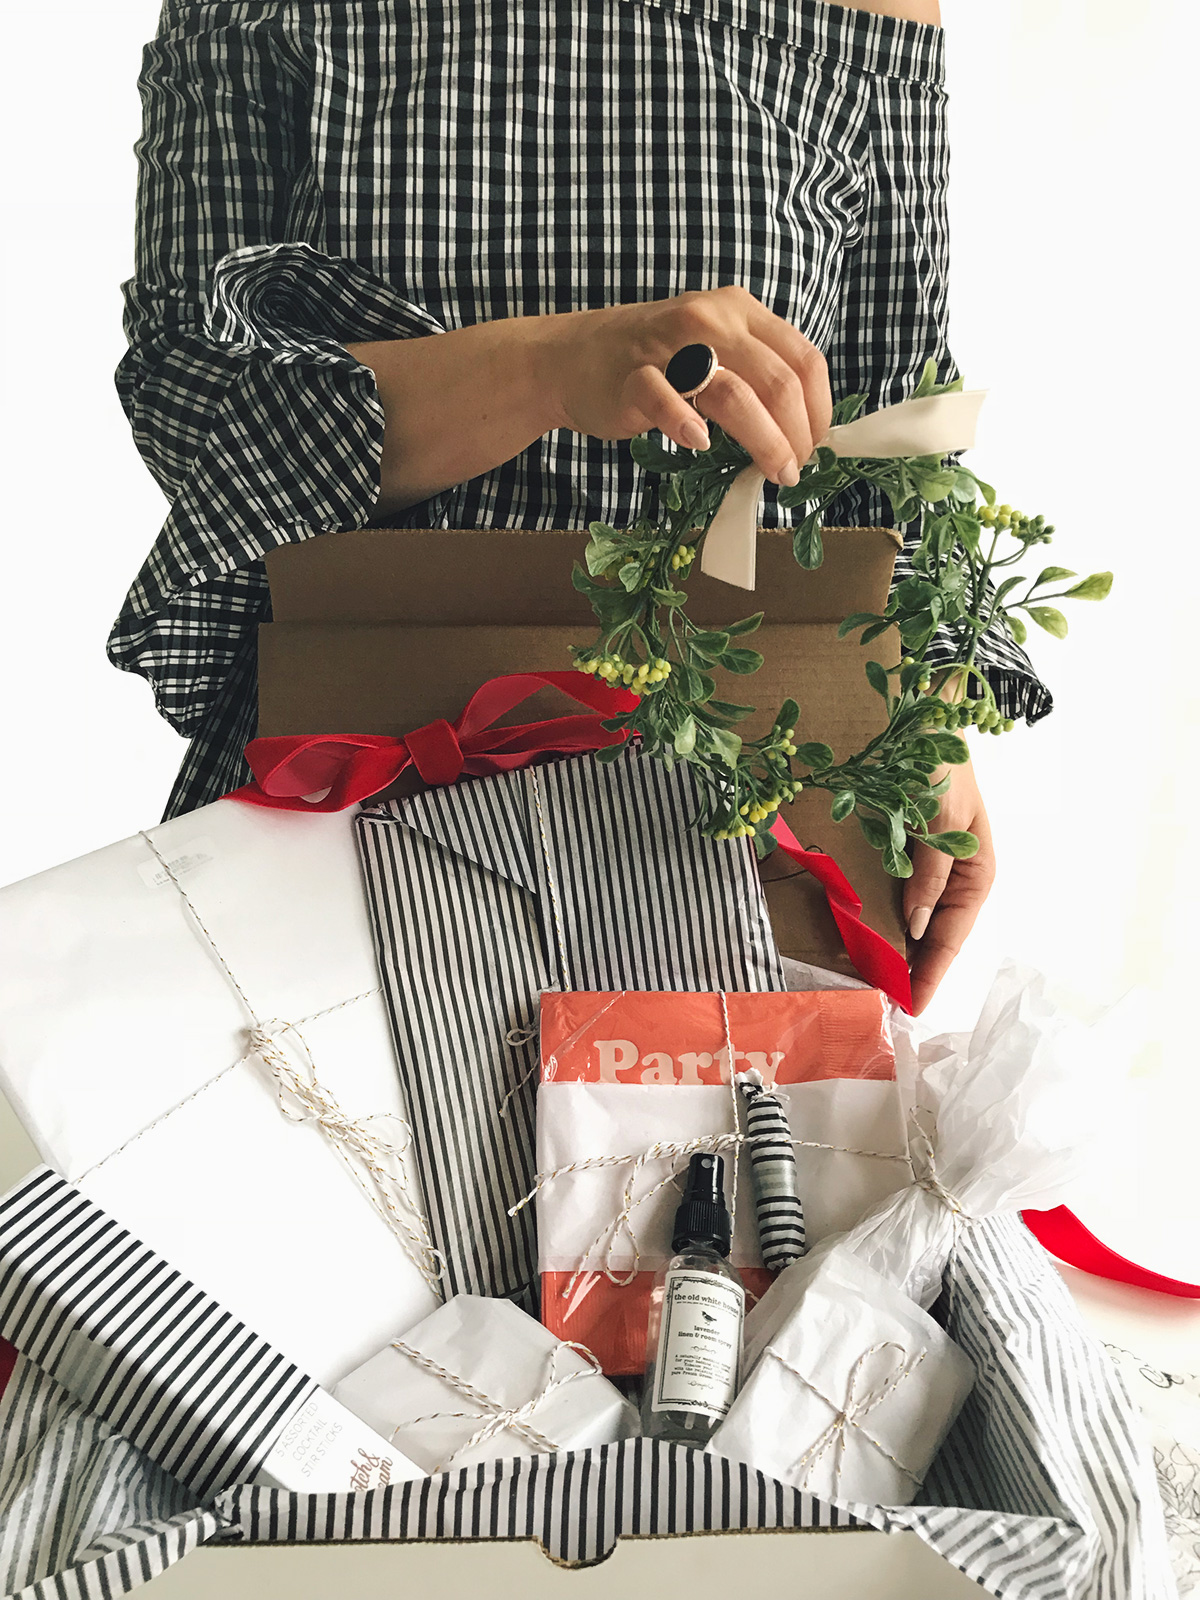 Introducing the Lily & Val Curated Surprise Box